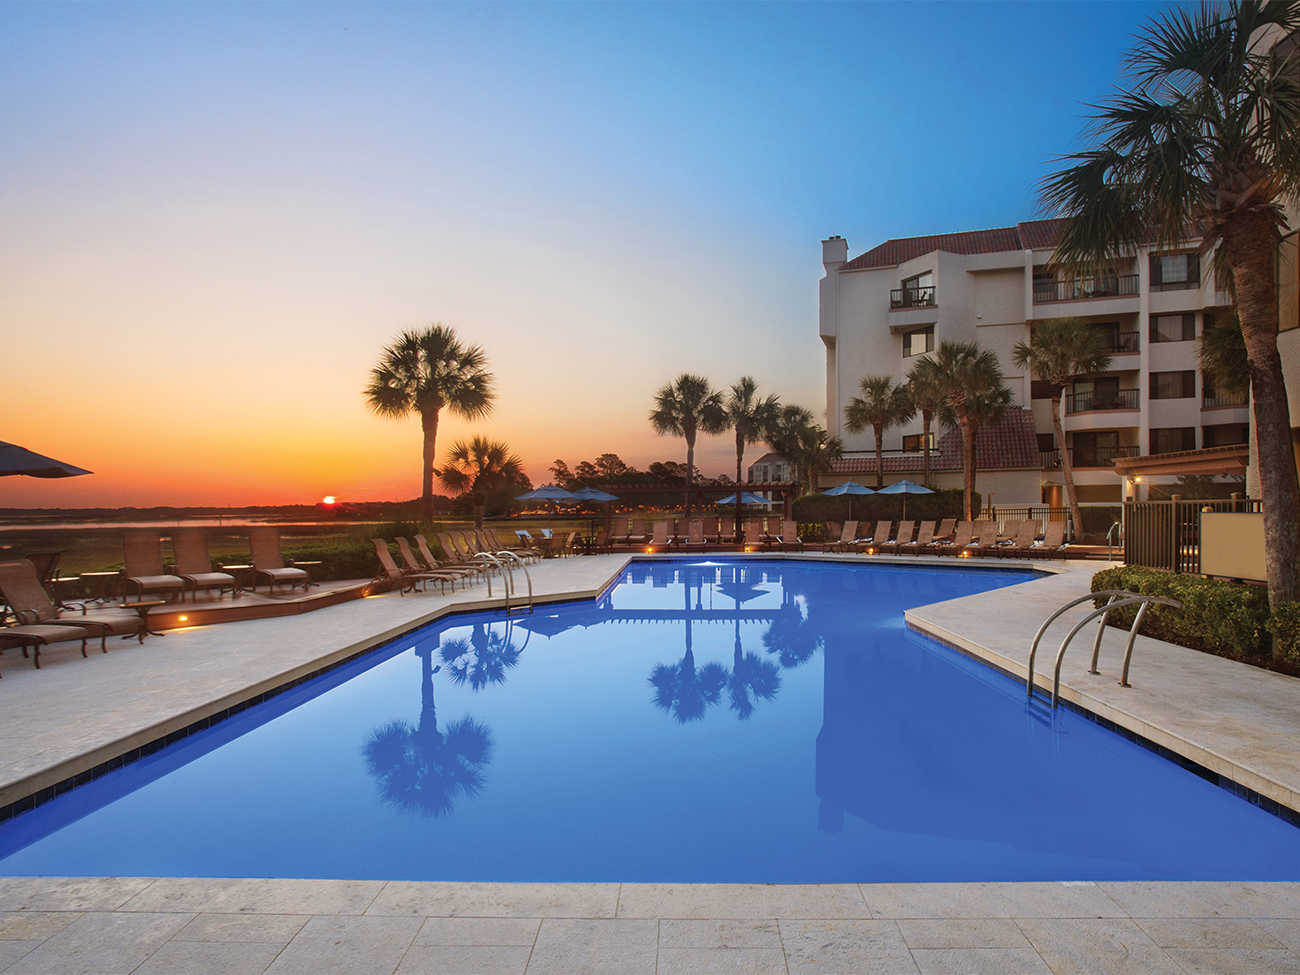 Marriott's Sunset Pointe Main Pool. Marriott's Sunset Pointe is located in Hilton Head Island, South Carolina United States.